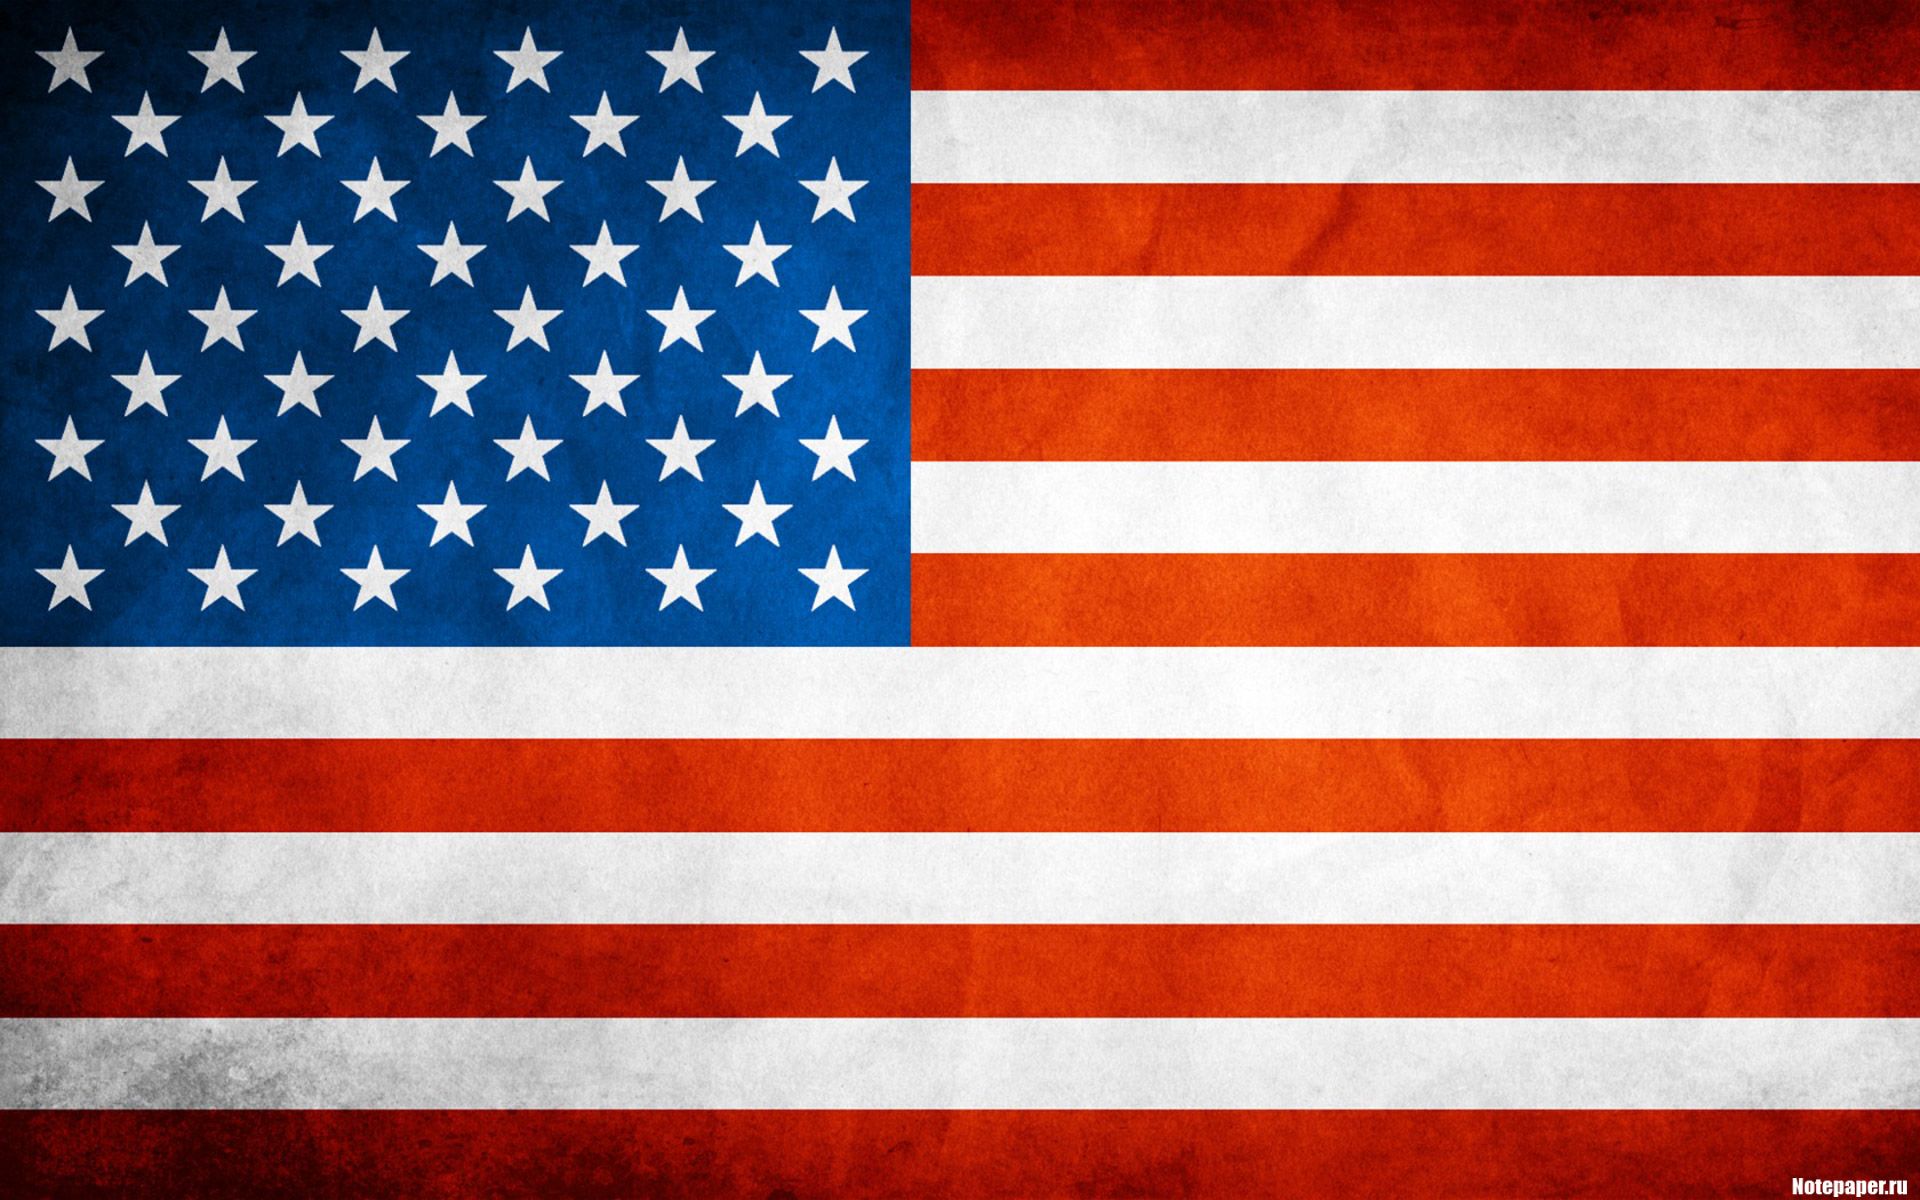 American Flag Backgrounds